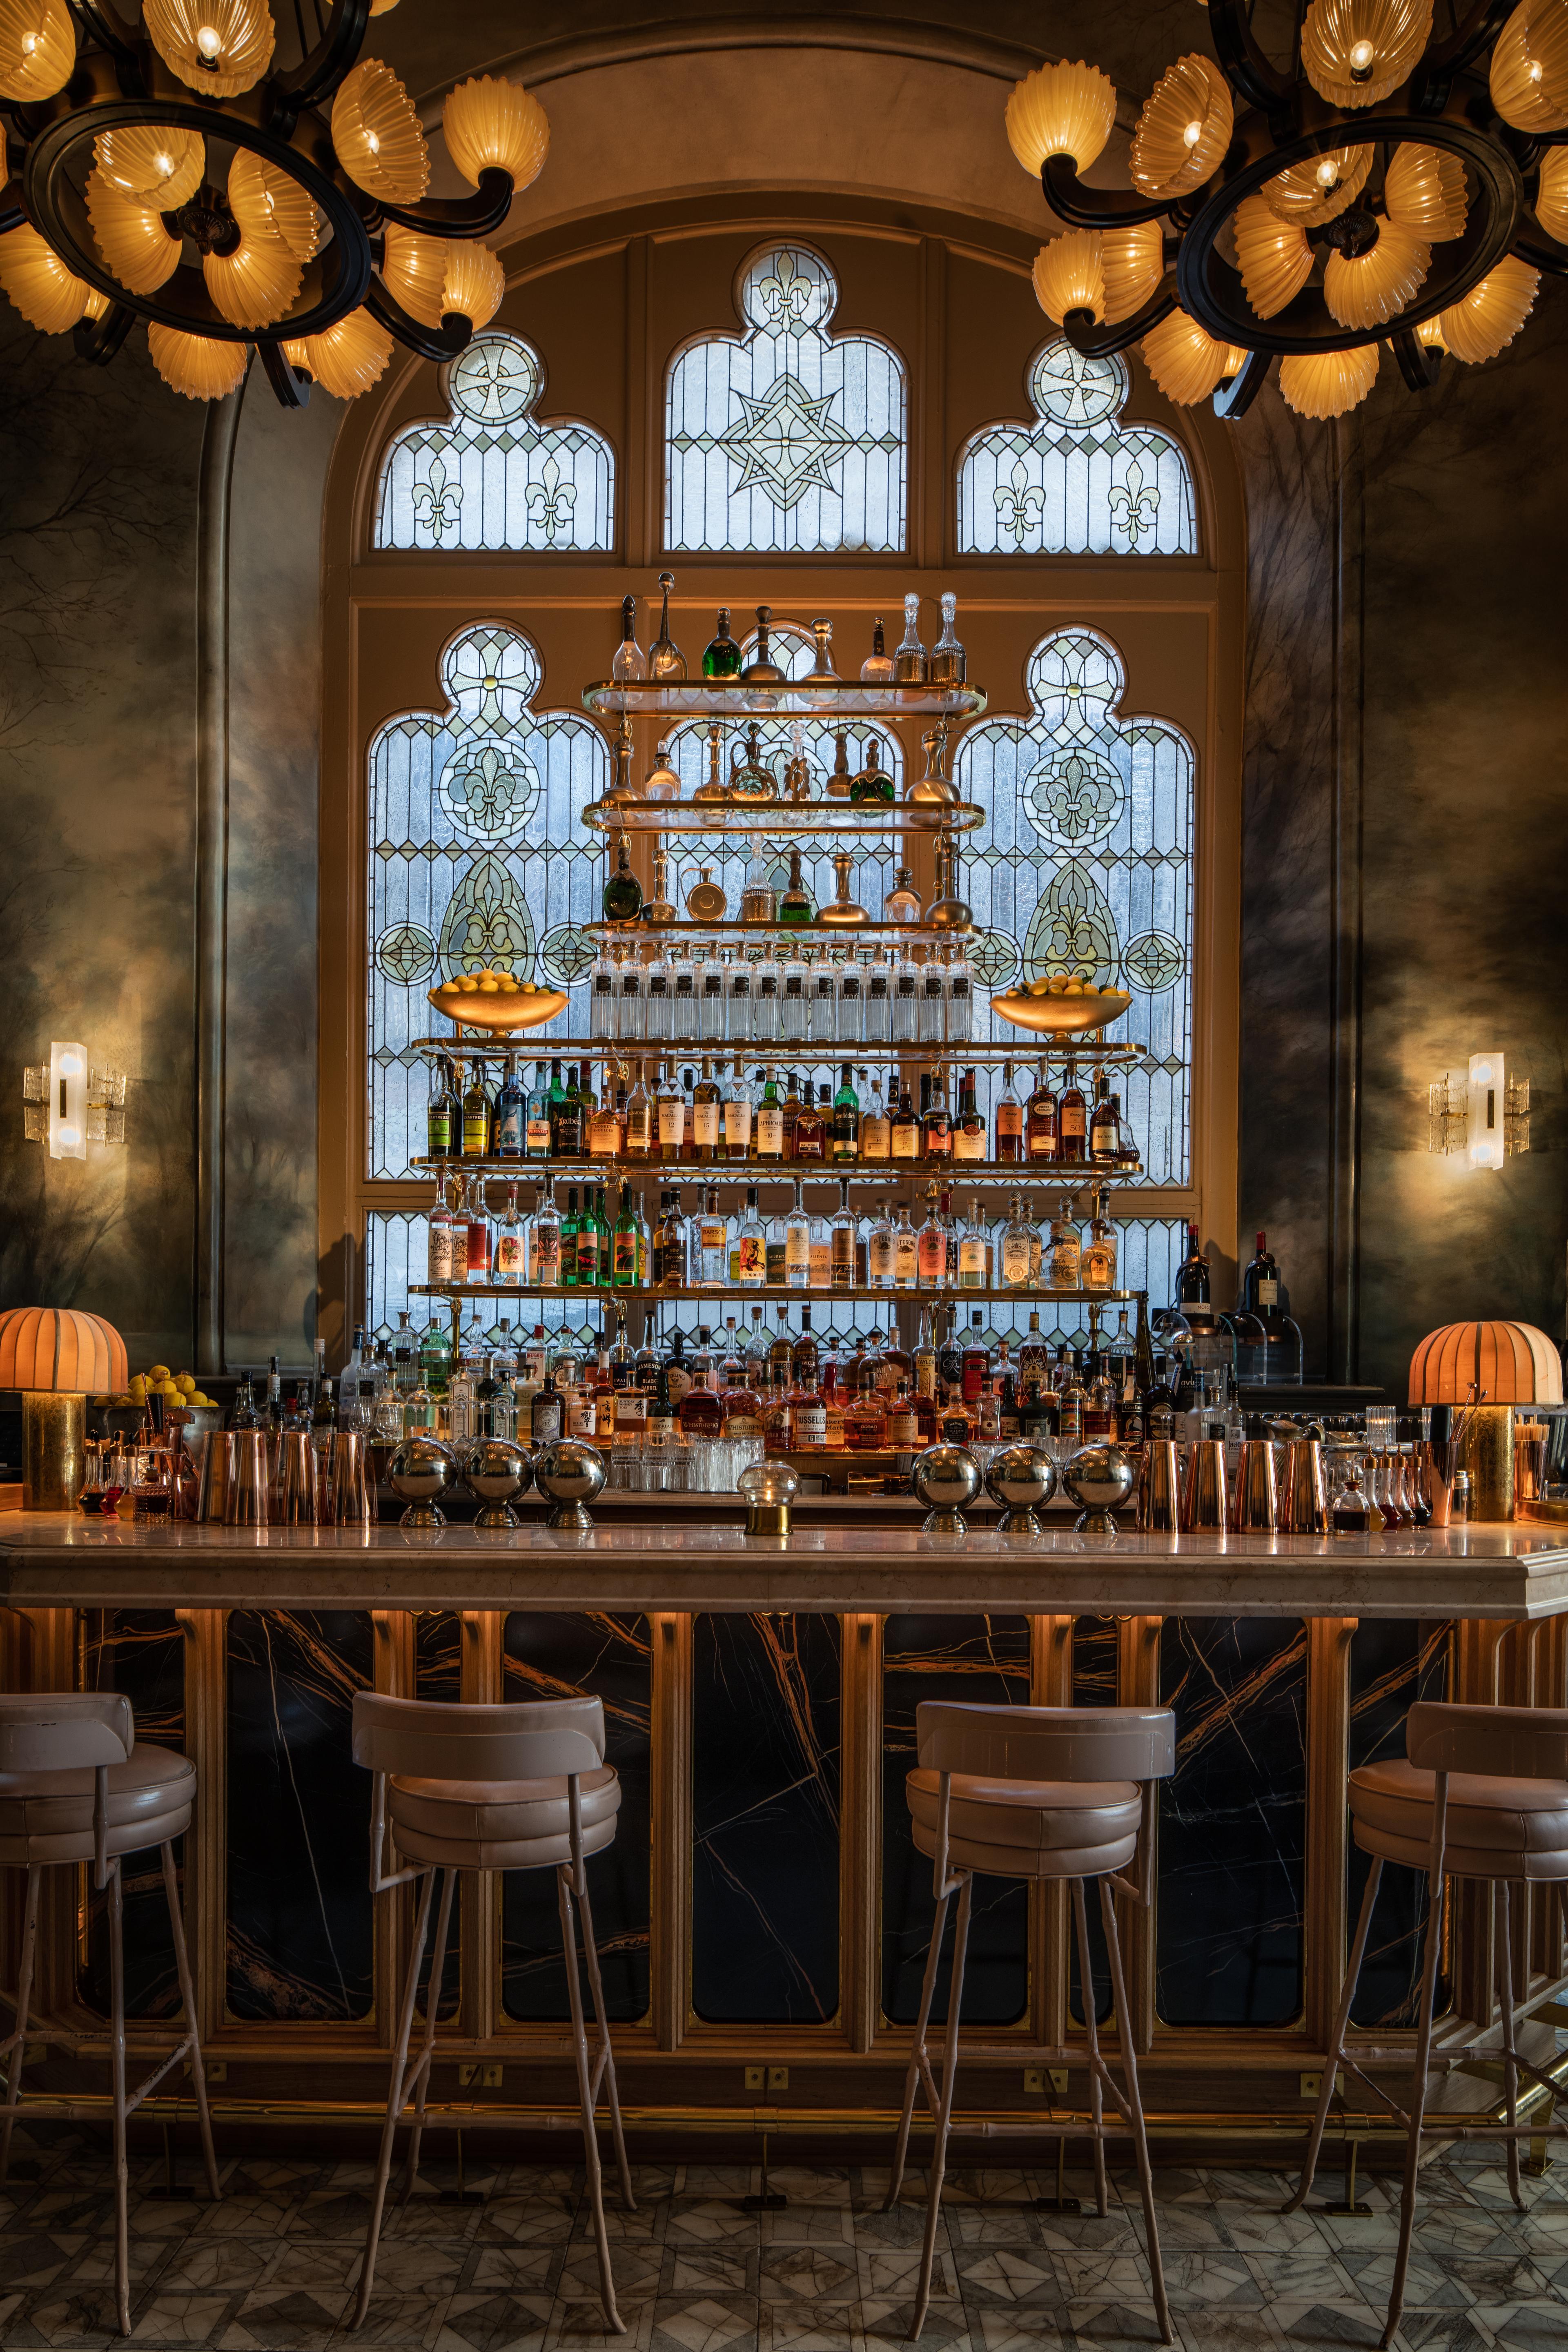 A view of a full bar with opulent chandeliers at a light glow.